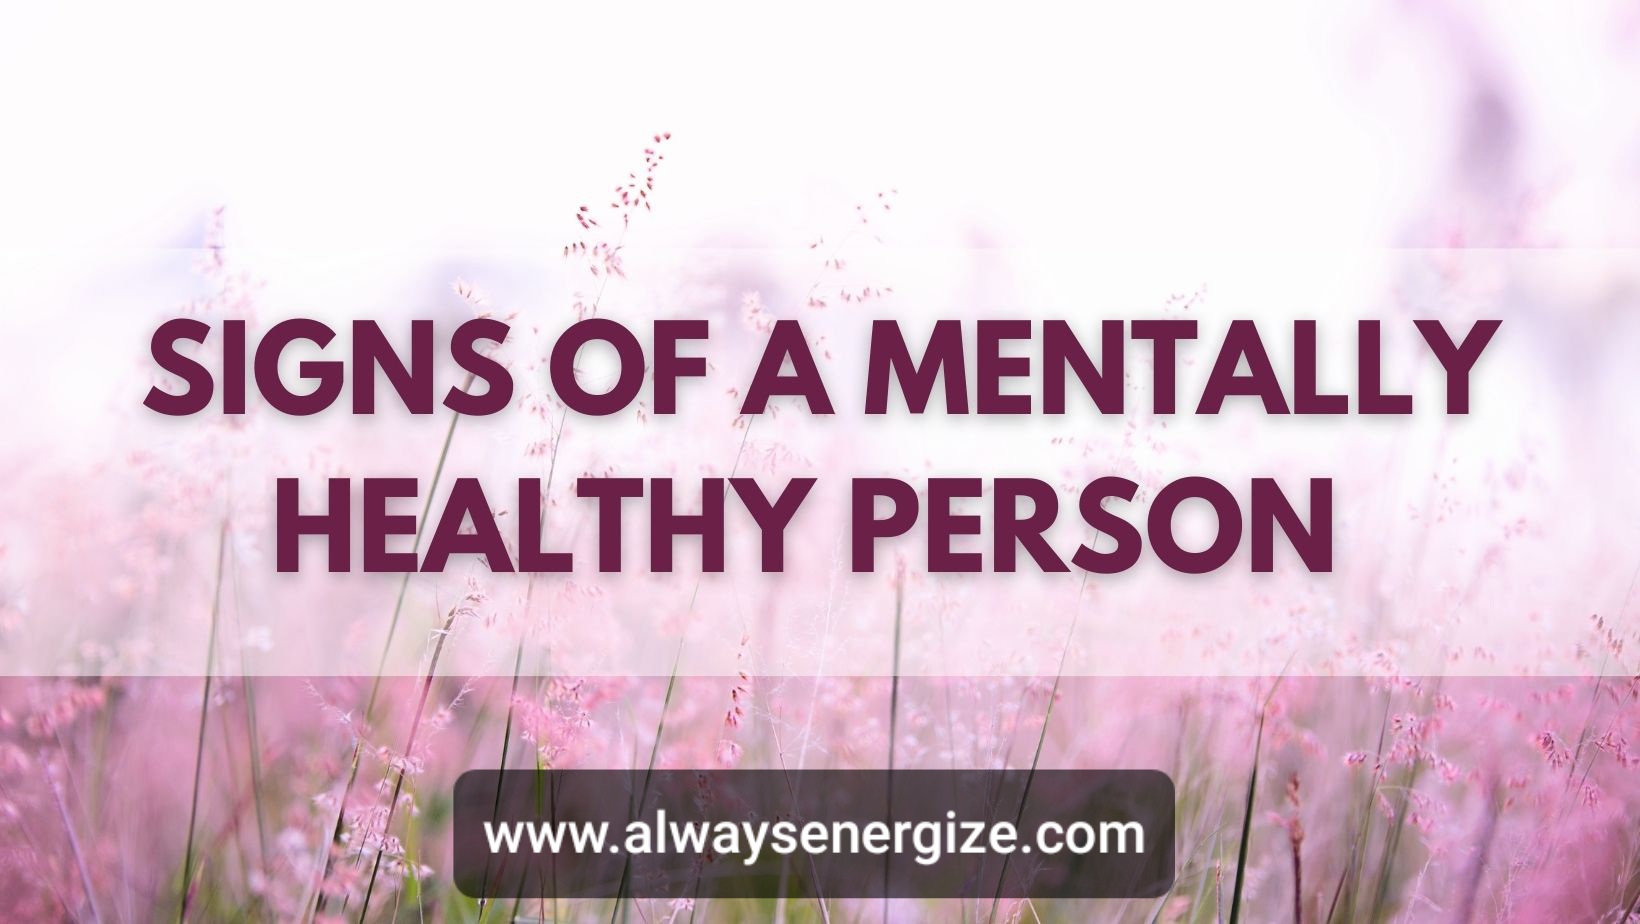 10 characteristics of mentally healthy person